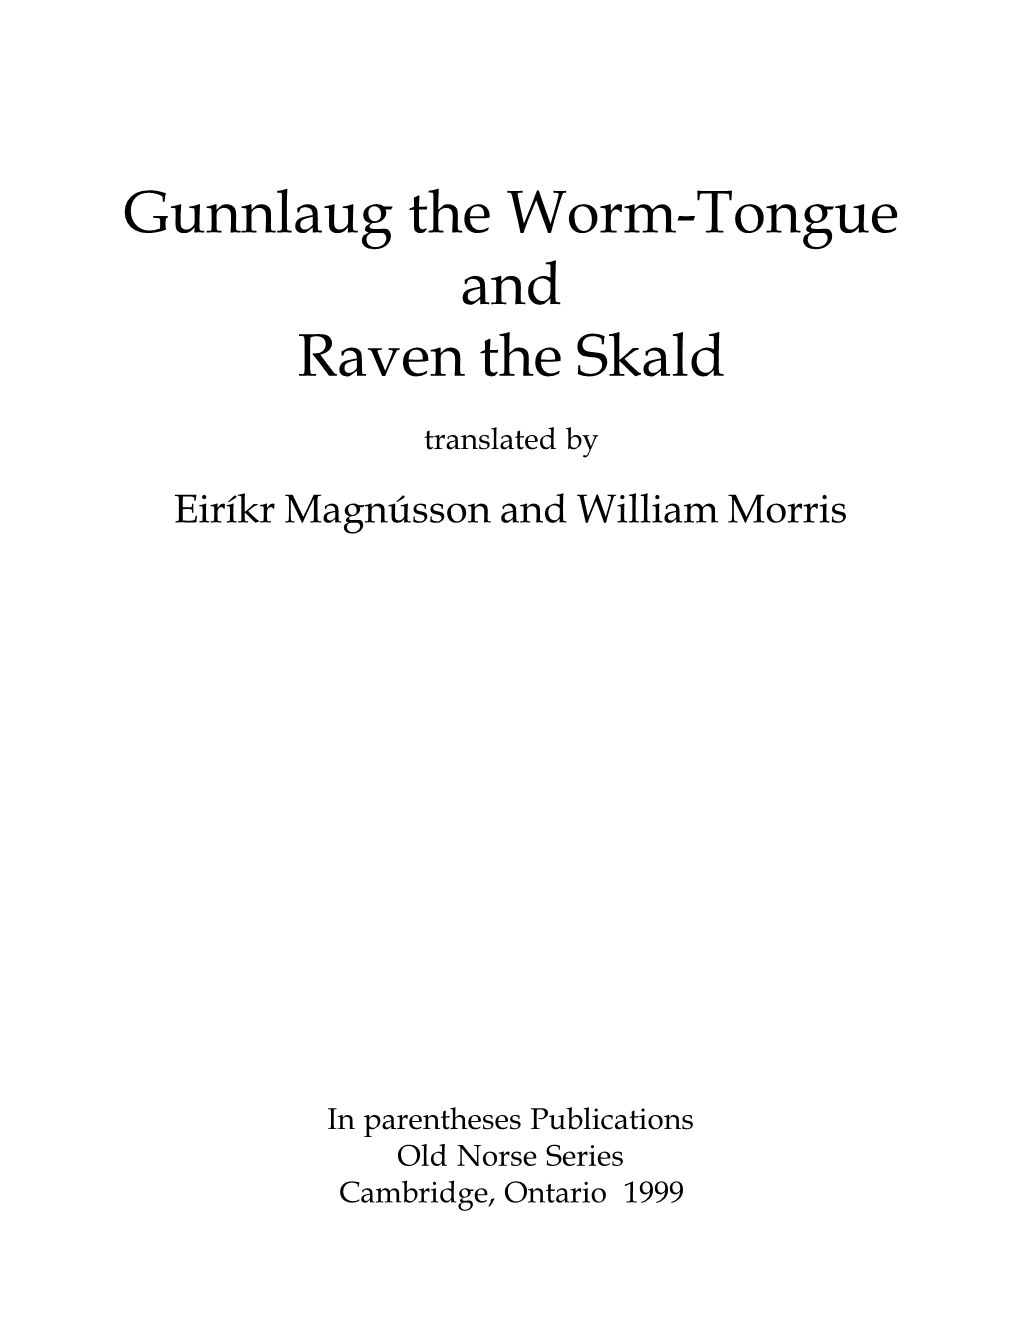 The Story of Gunnlaug the Worm-Tongue and Raven the Skald